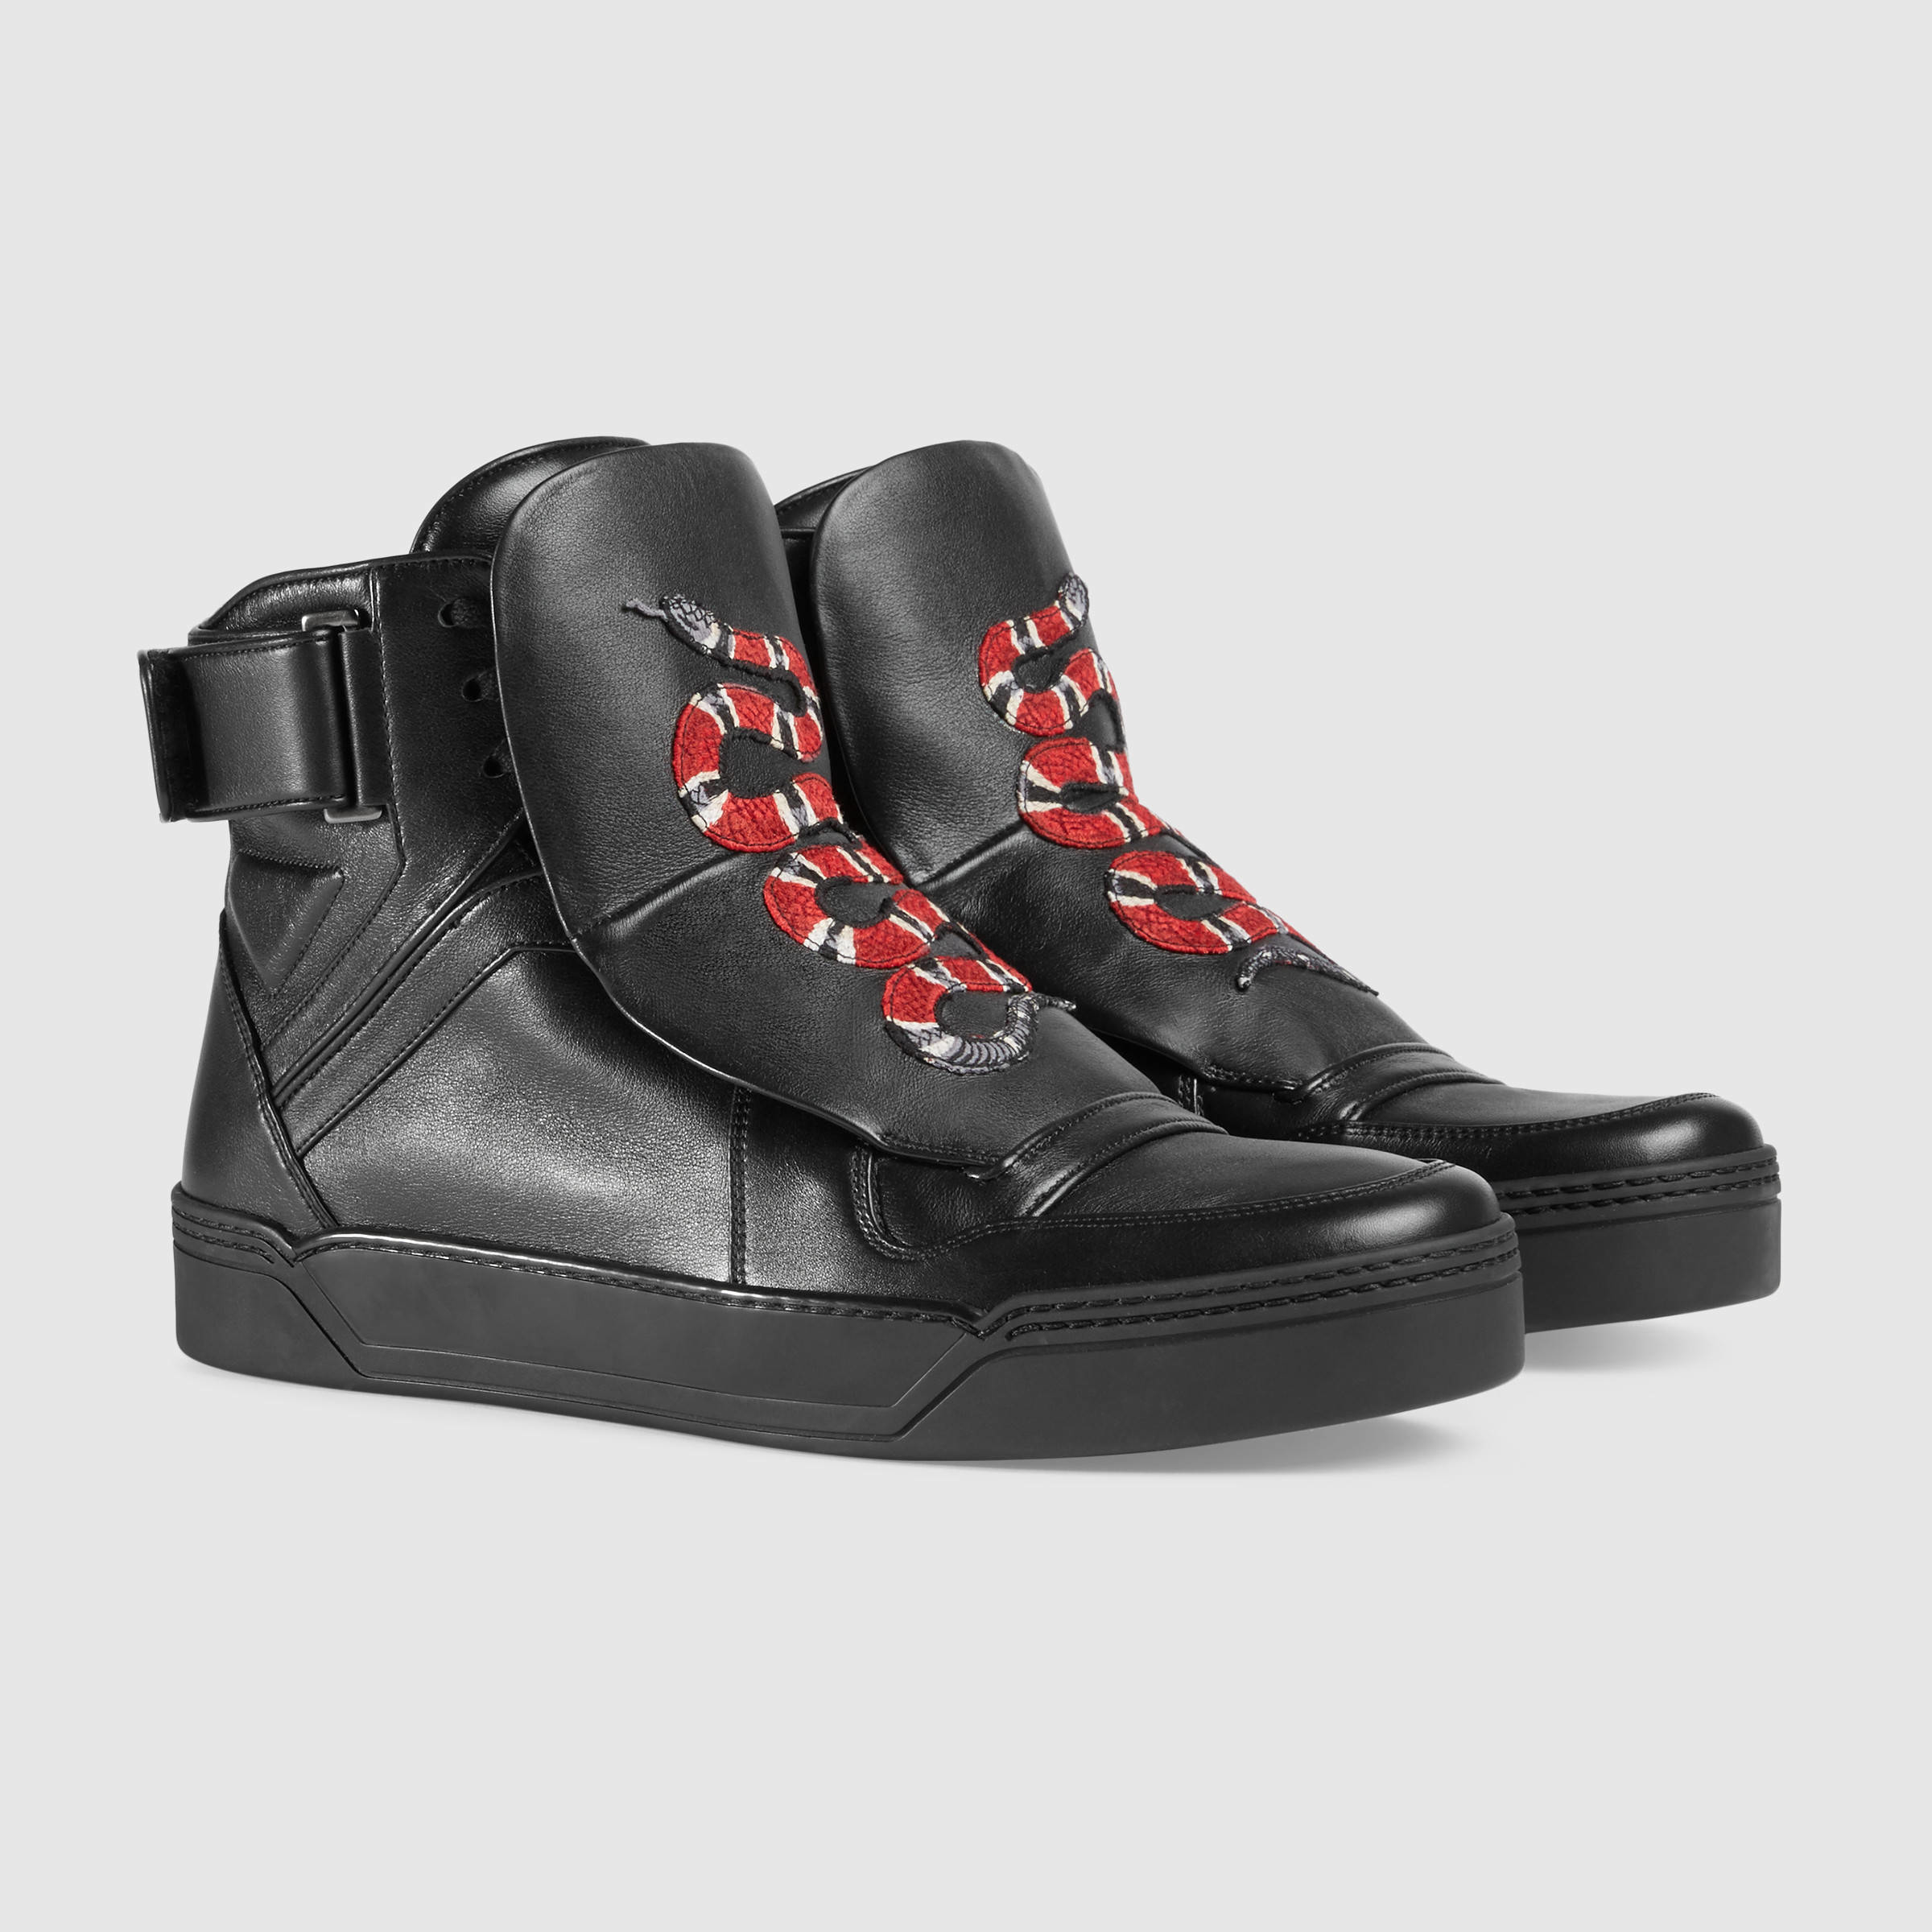 gucci snake boots mens, OFF 78%,www 